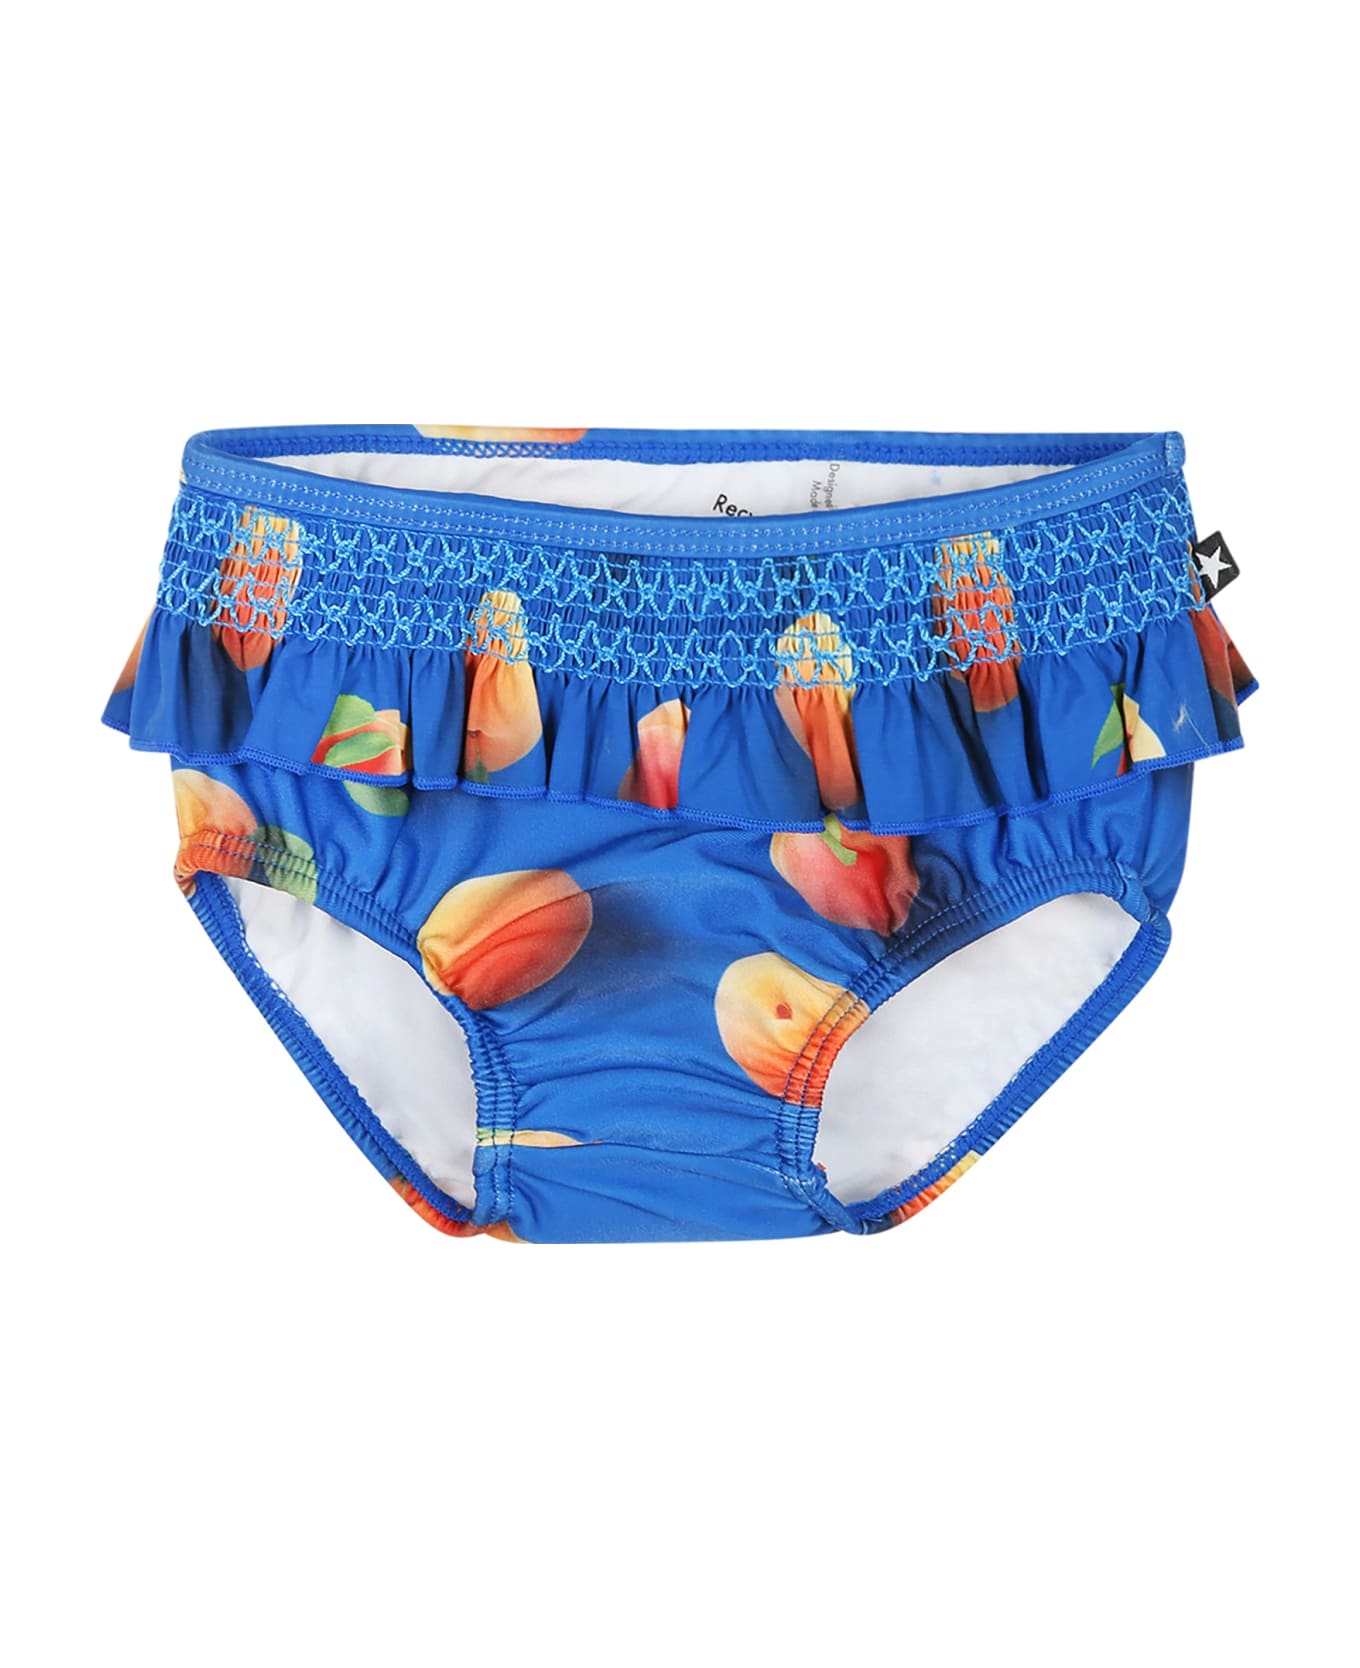 Molo Blue Swim Briefs For Baby Girl With Apricot Print - Blue